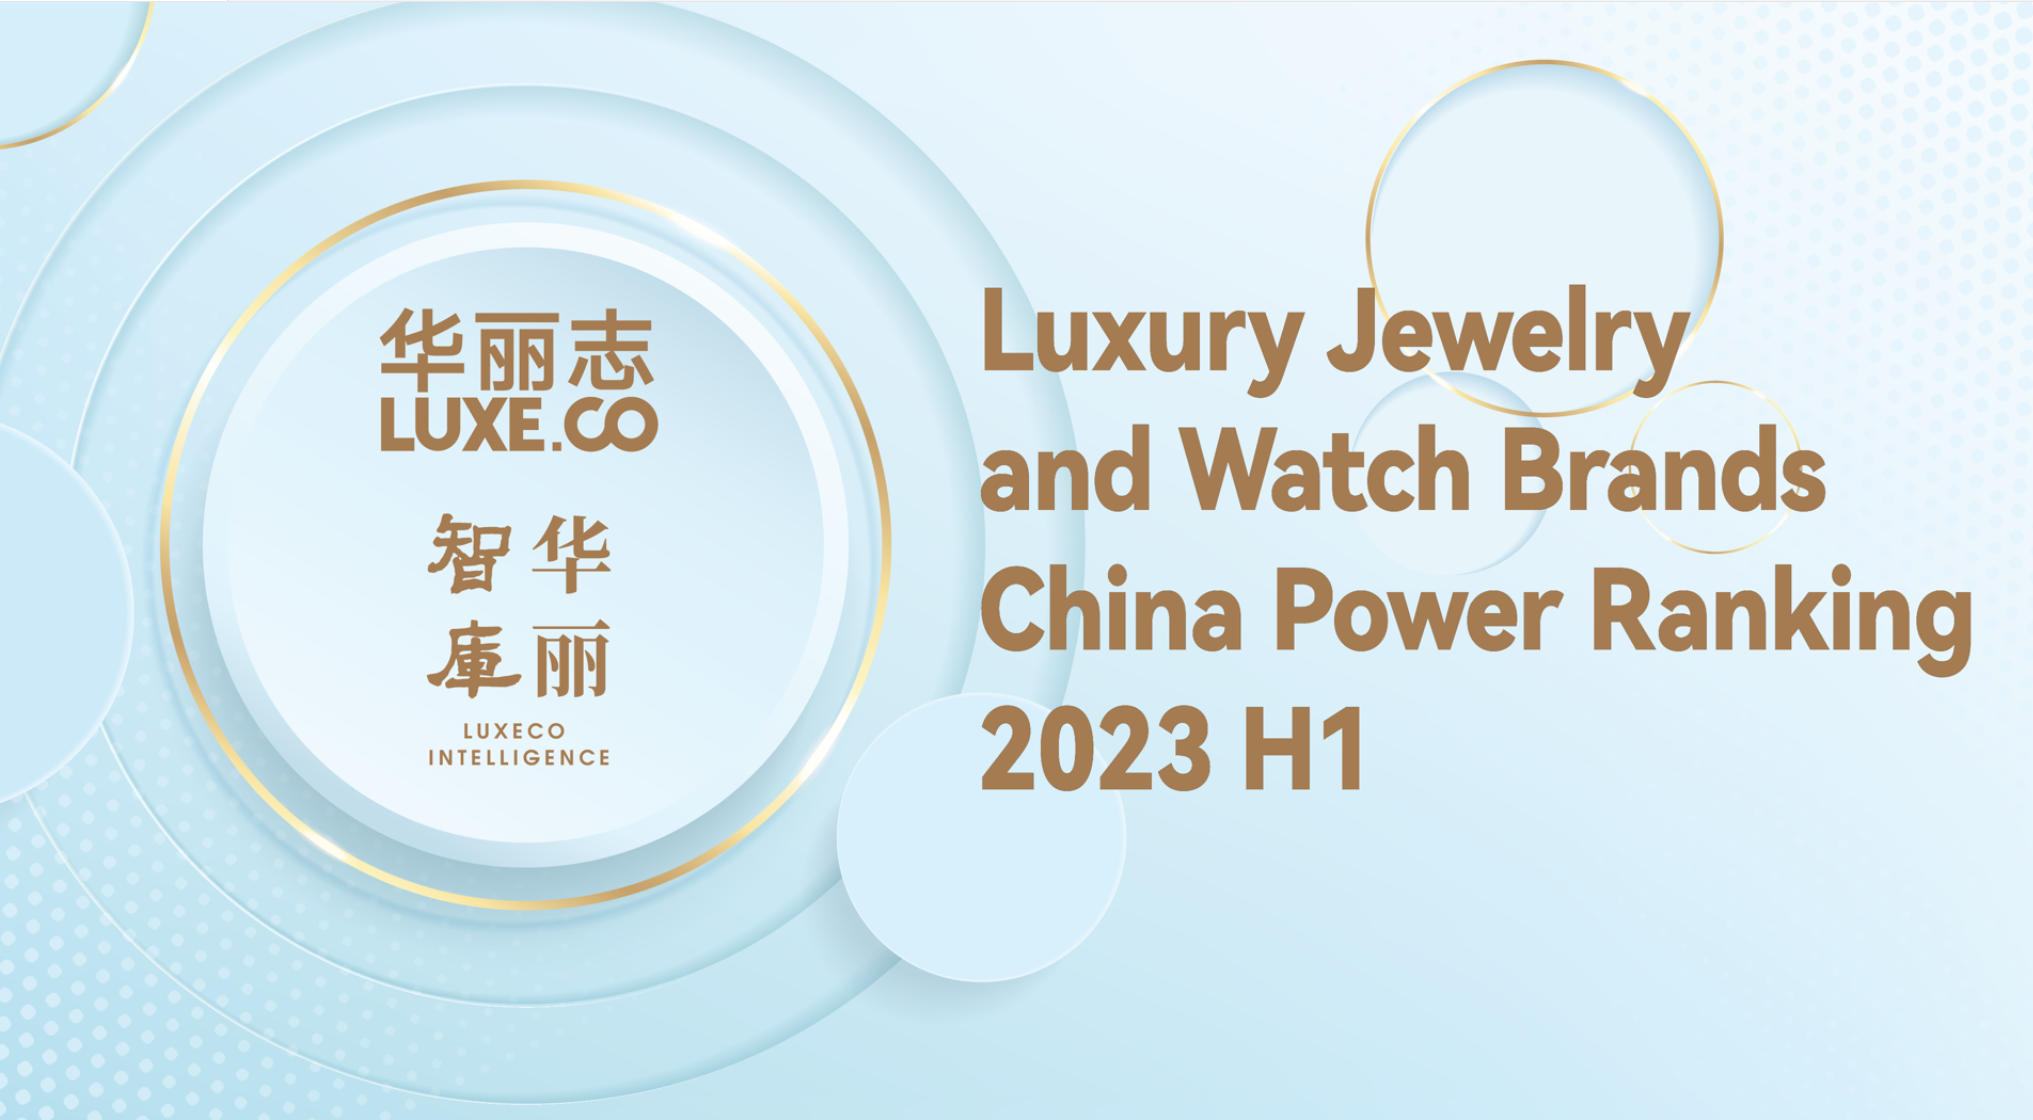 Luxe.CO Intelligence Releases “Luxury Jewelry and Watch Brands China Power Ranking 2023H1”